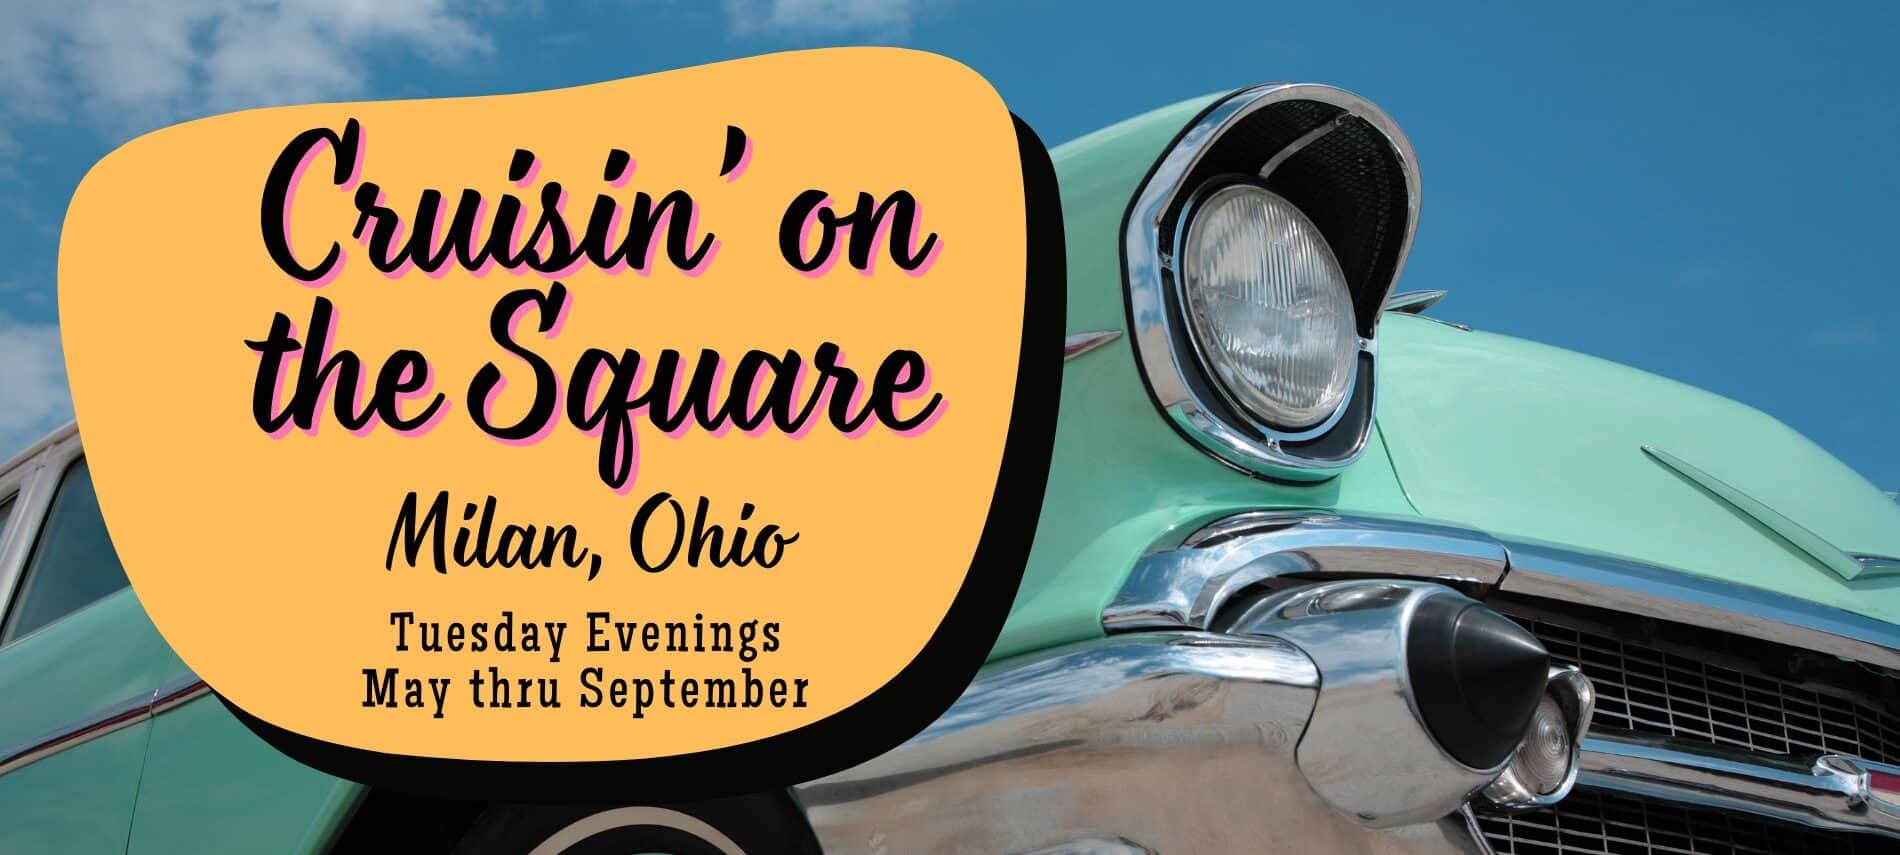 Classic car detail with 1950s style lettering reading Cruisin' on the Square, Milan, Ohio, Tuesday evenings, May thru September